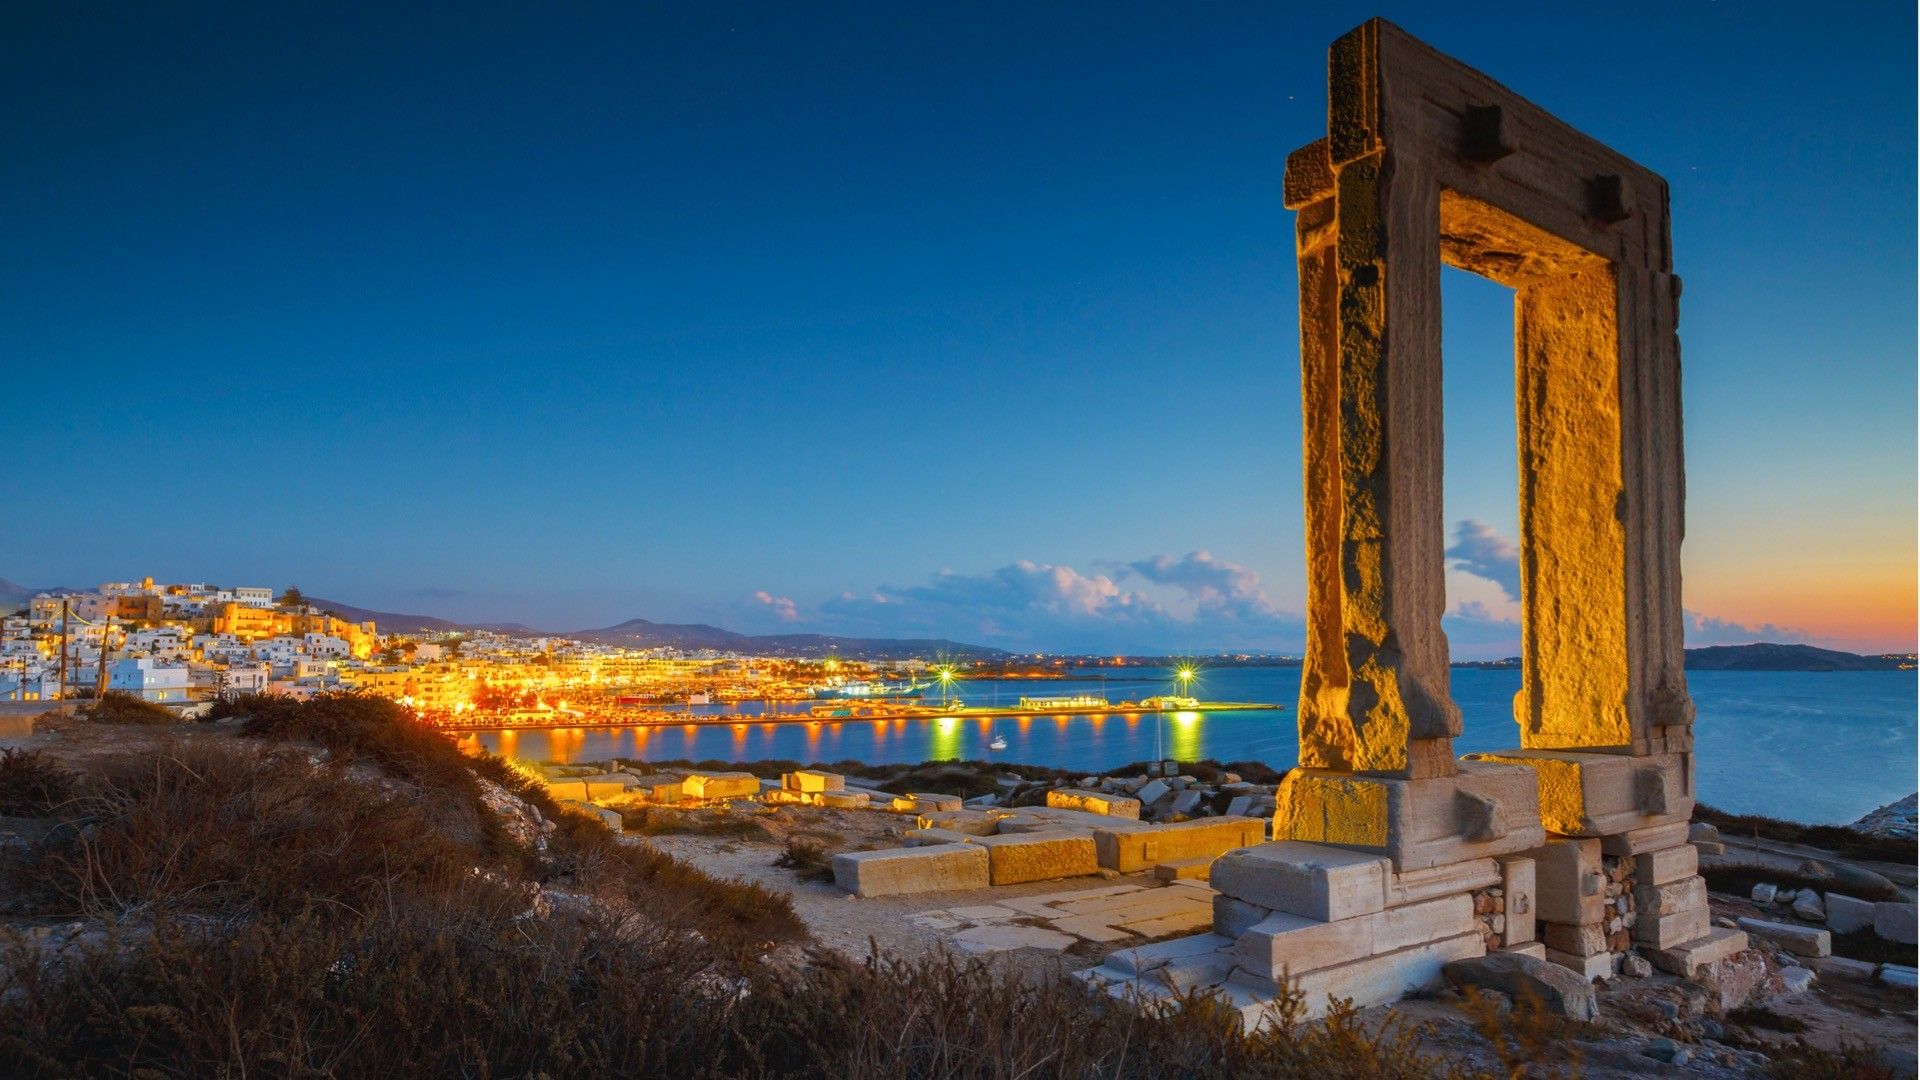 This image shows Portara in the blue hour with the view of Naxos Town in the background. 